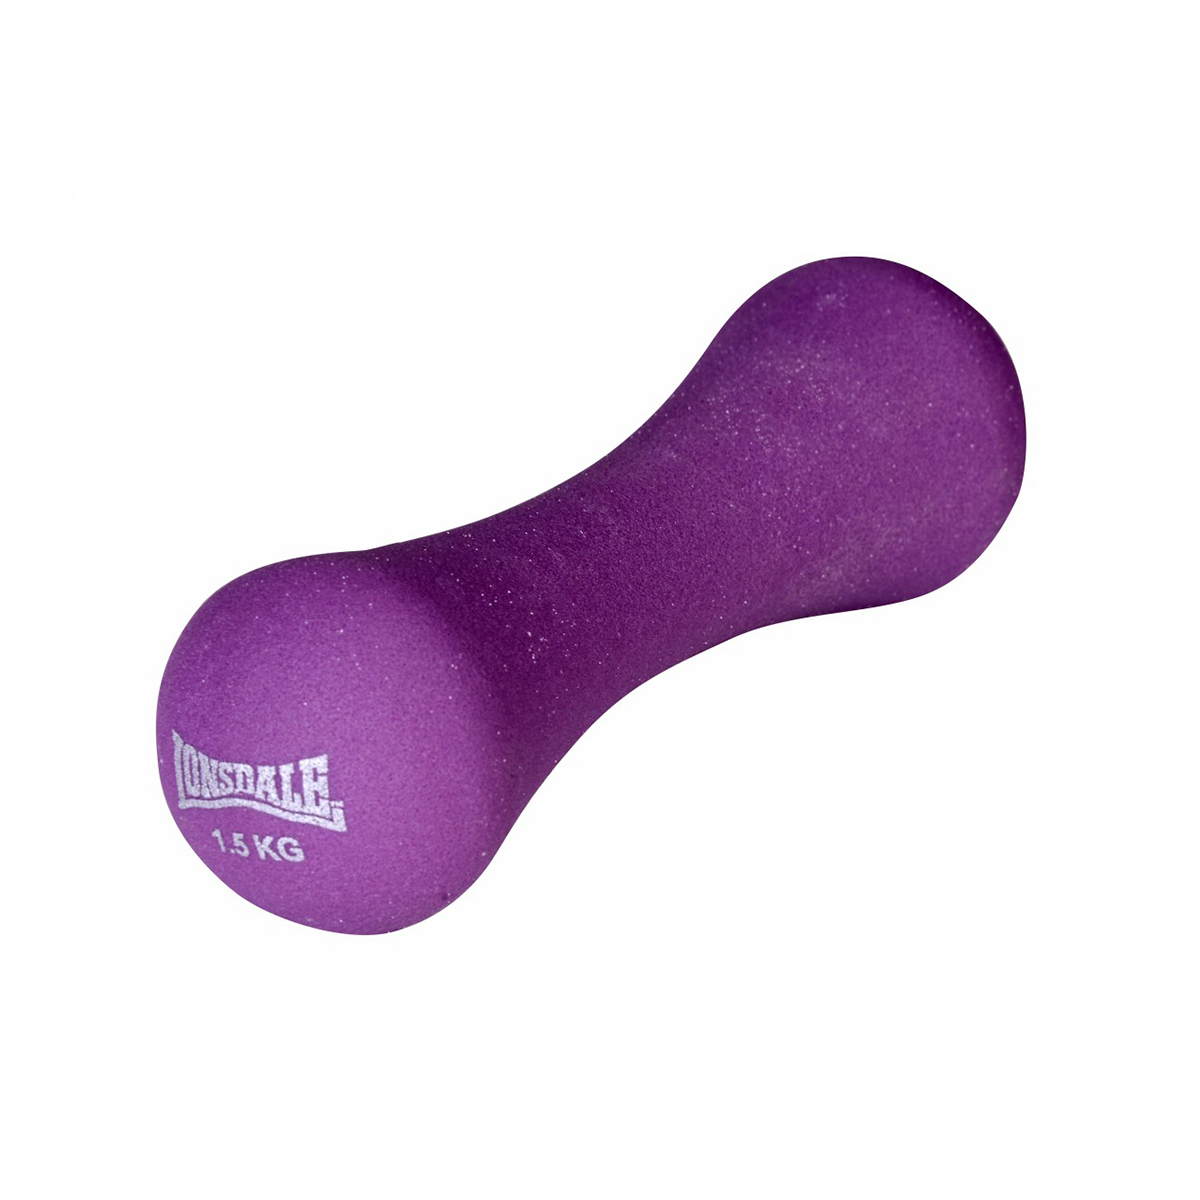 Lonsdale LONSDALE HAND WEIGHTS 00 MULTI 1.5 KG 